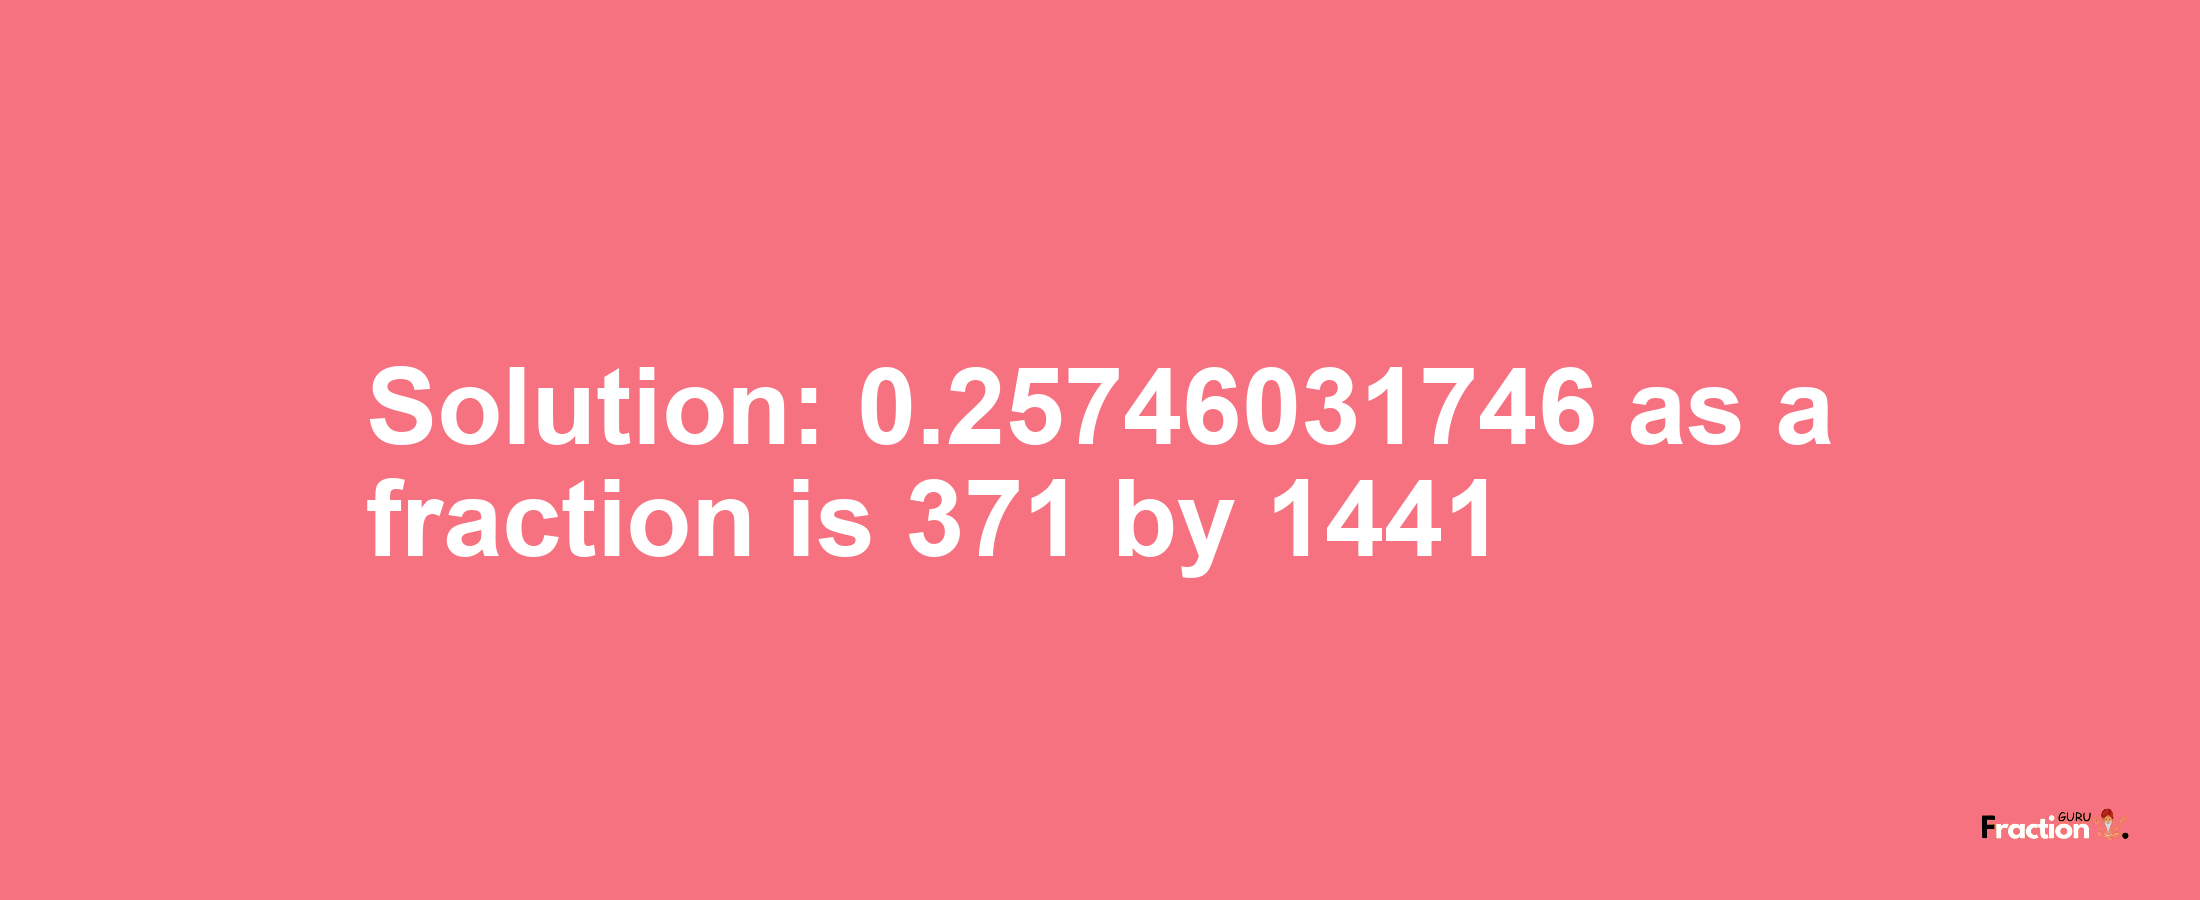 Solution:0.25746031746 as a fraction is 371/1441